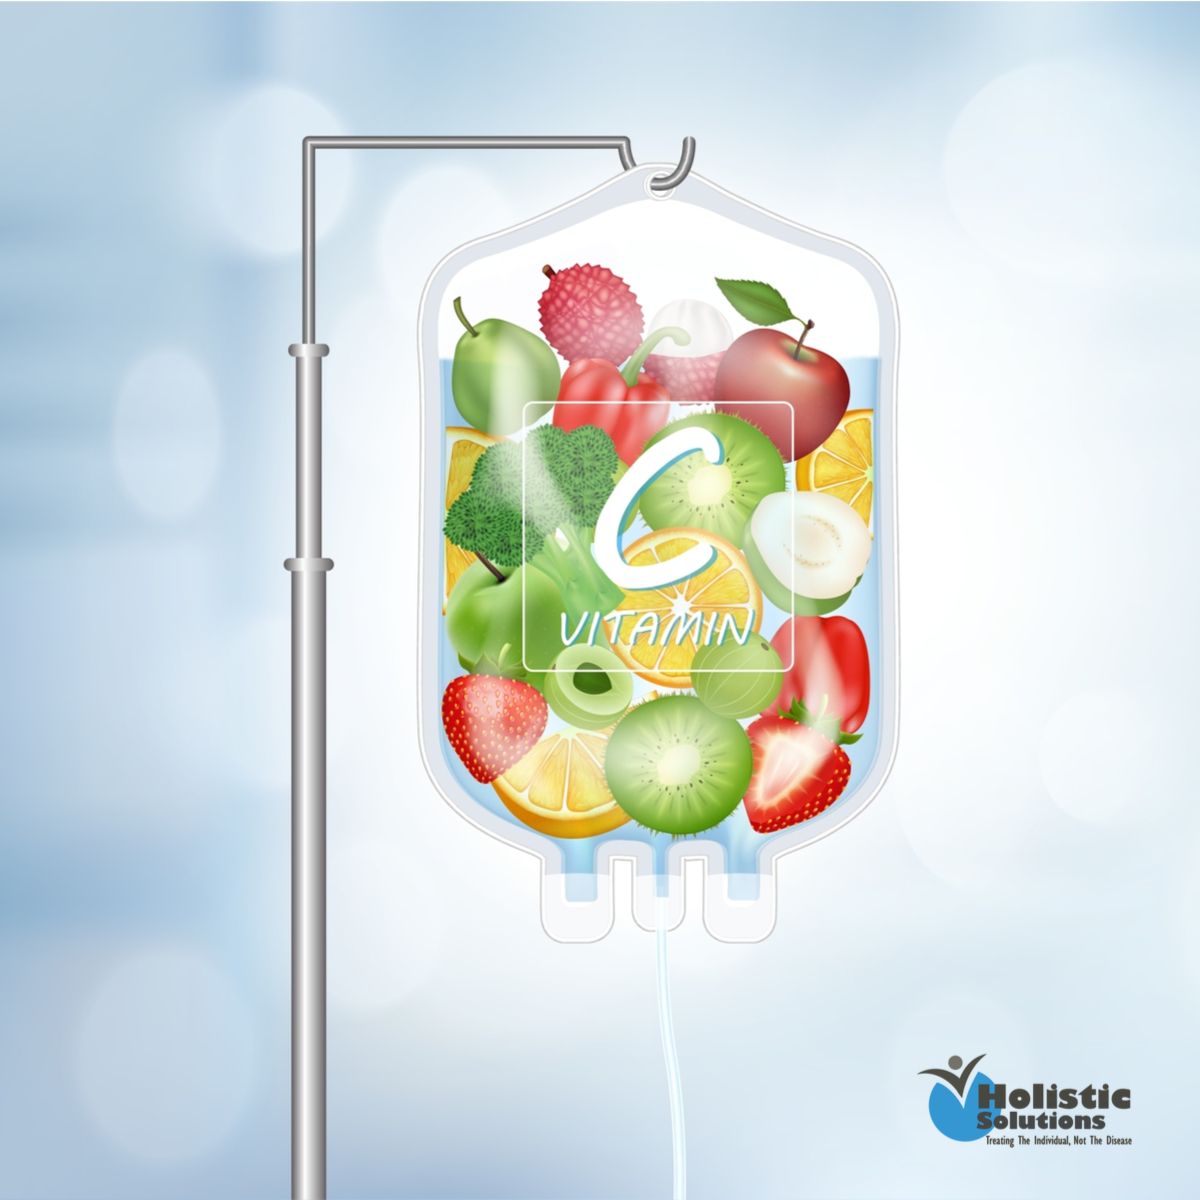 Are You Looking For High Dose Vitamin C IV Therapy & Treatment?